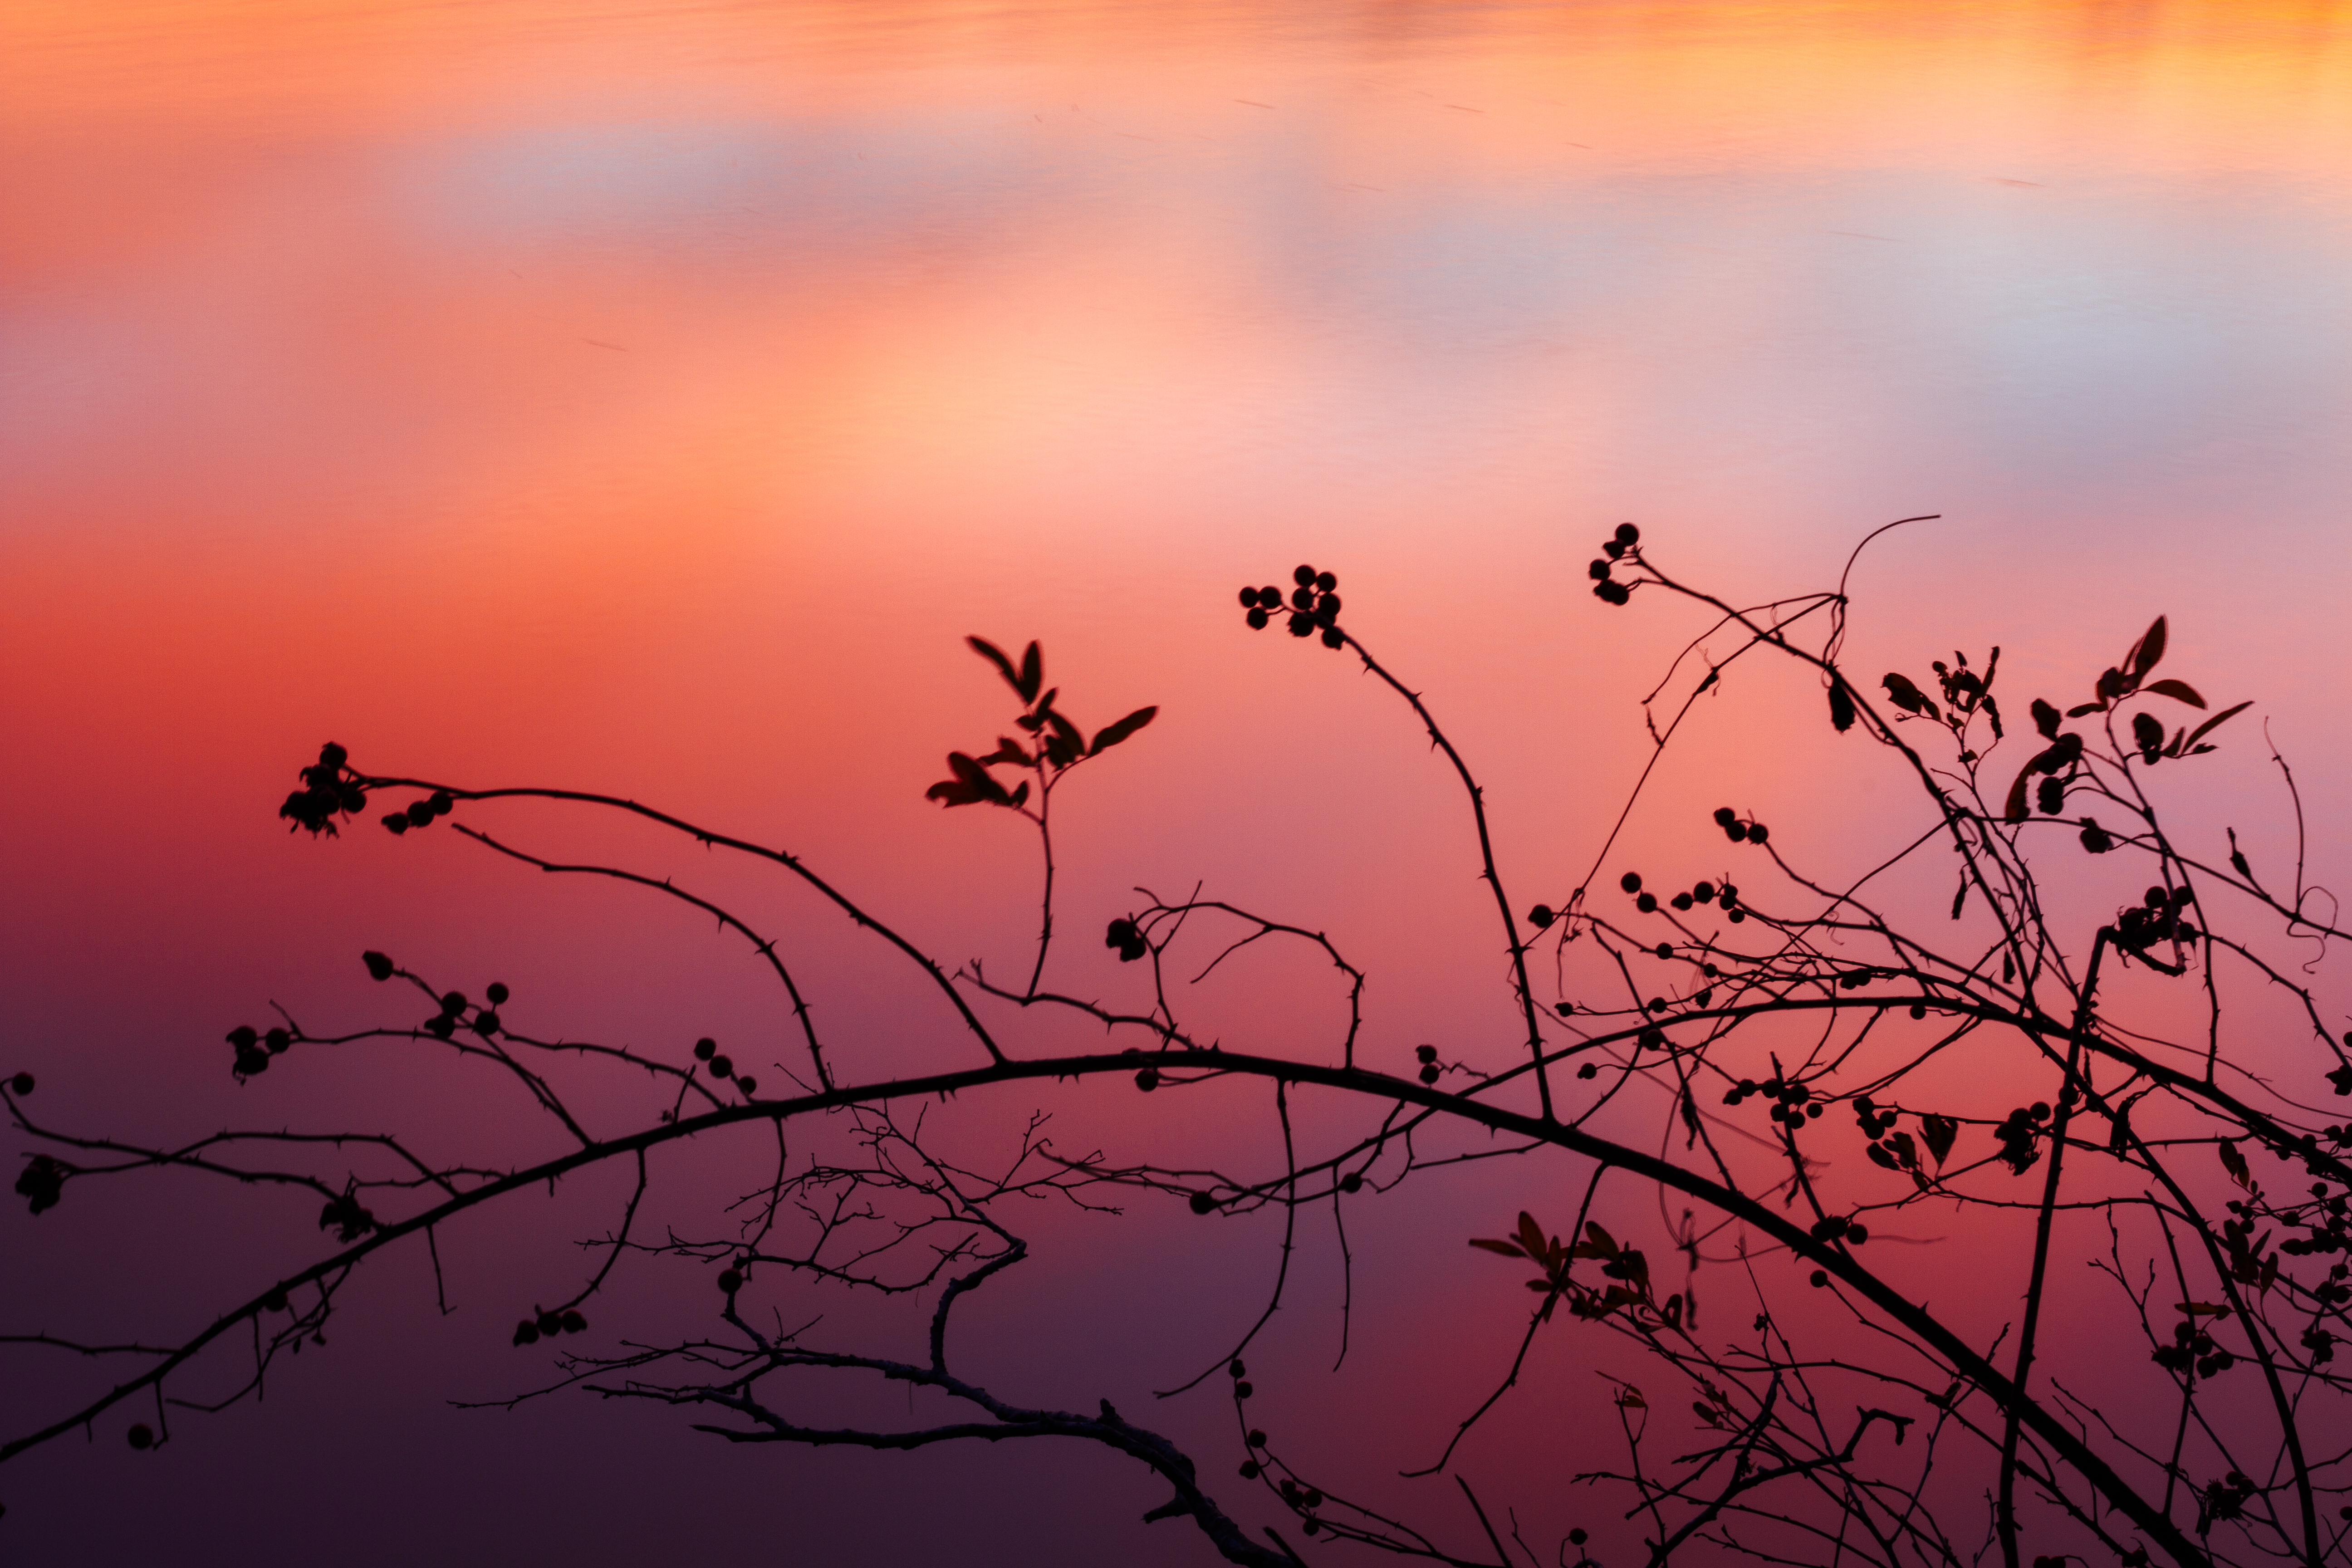 New Lock Screen Wallpapers sunset, nature, silhouette, branch, shadows